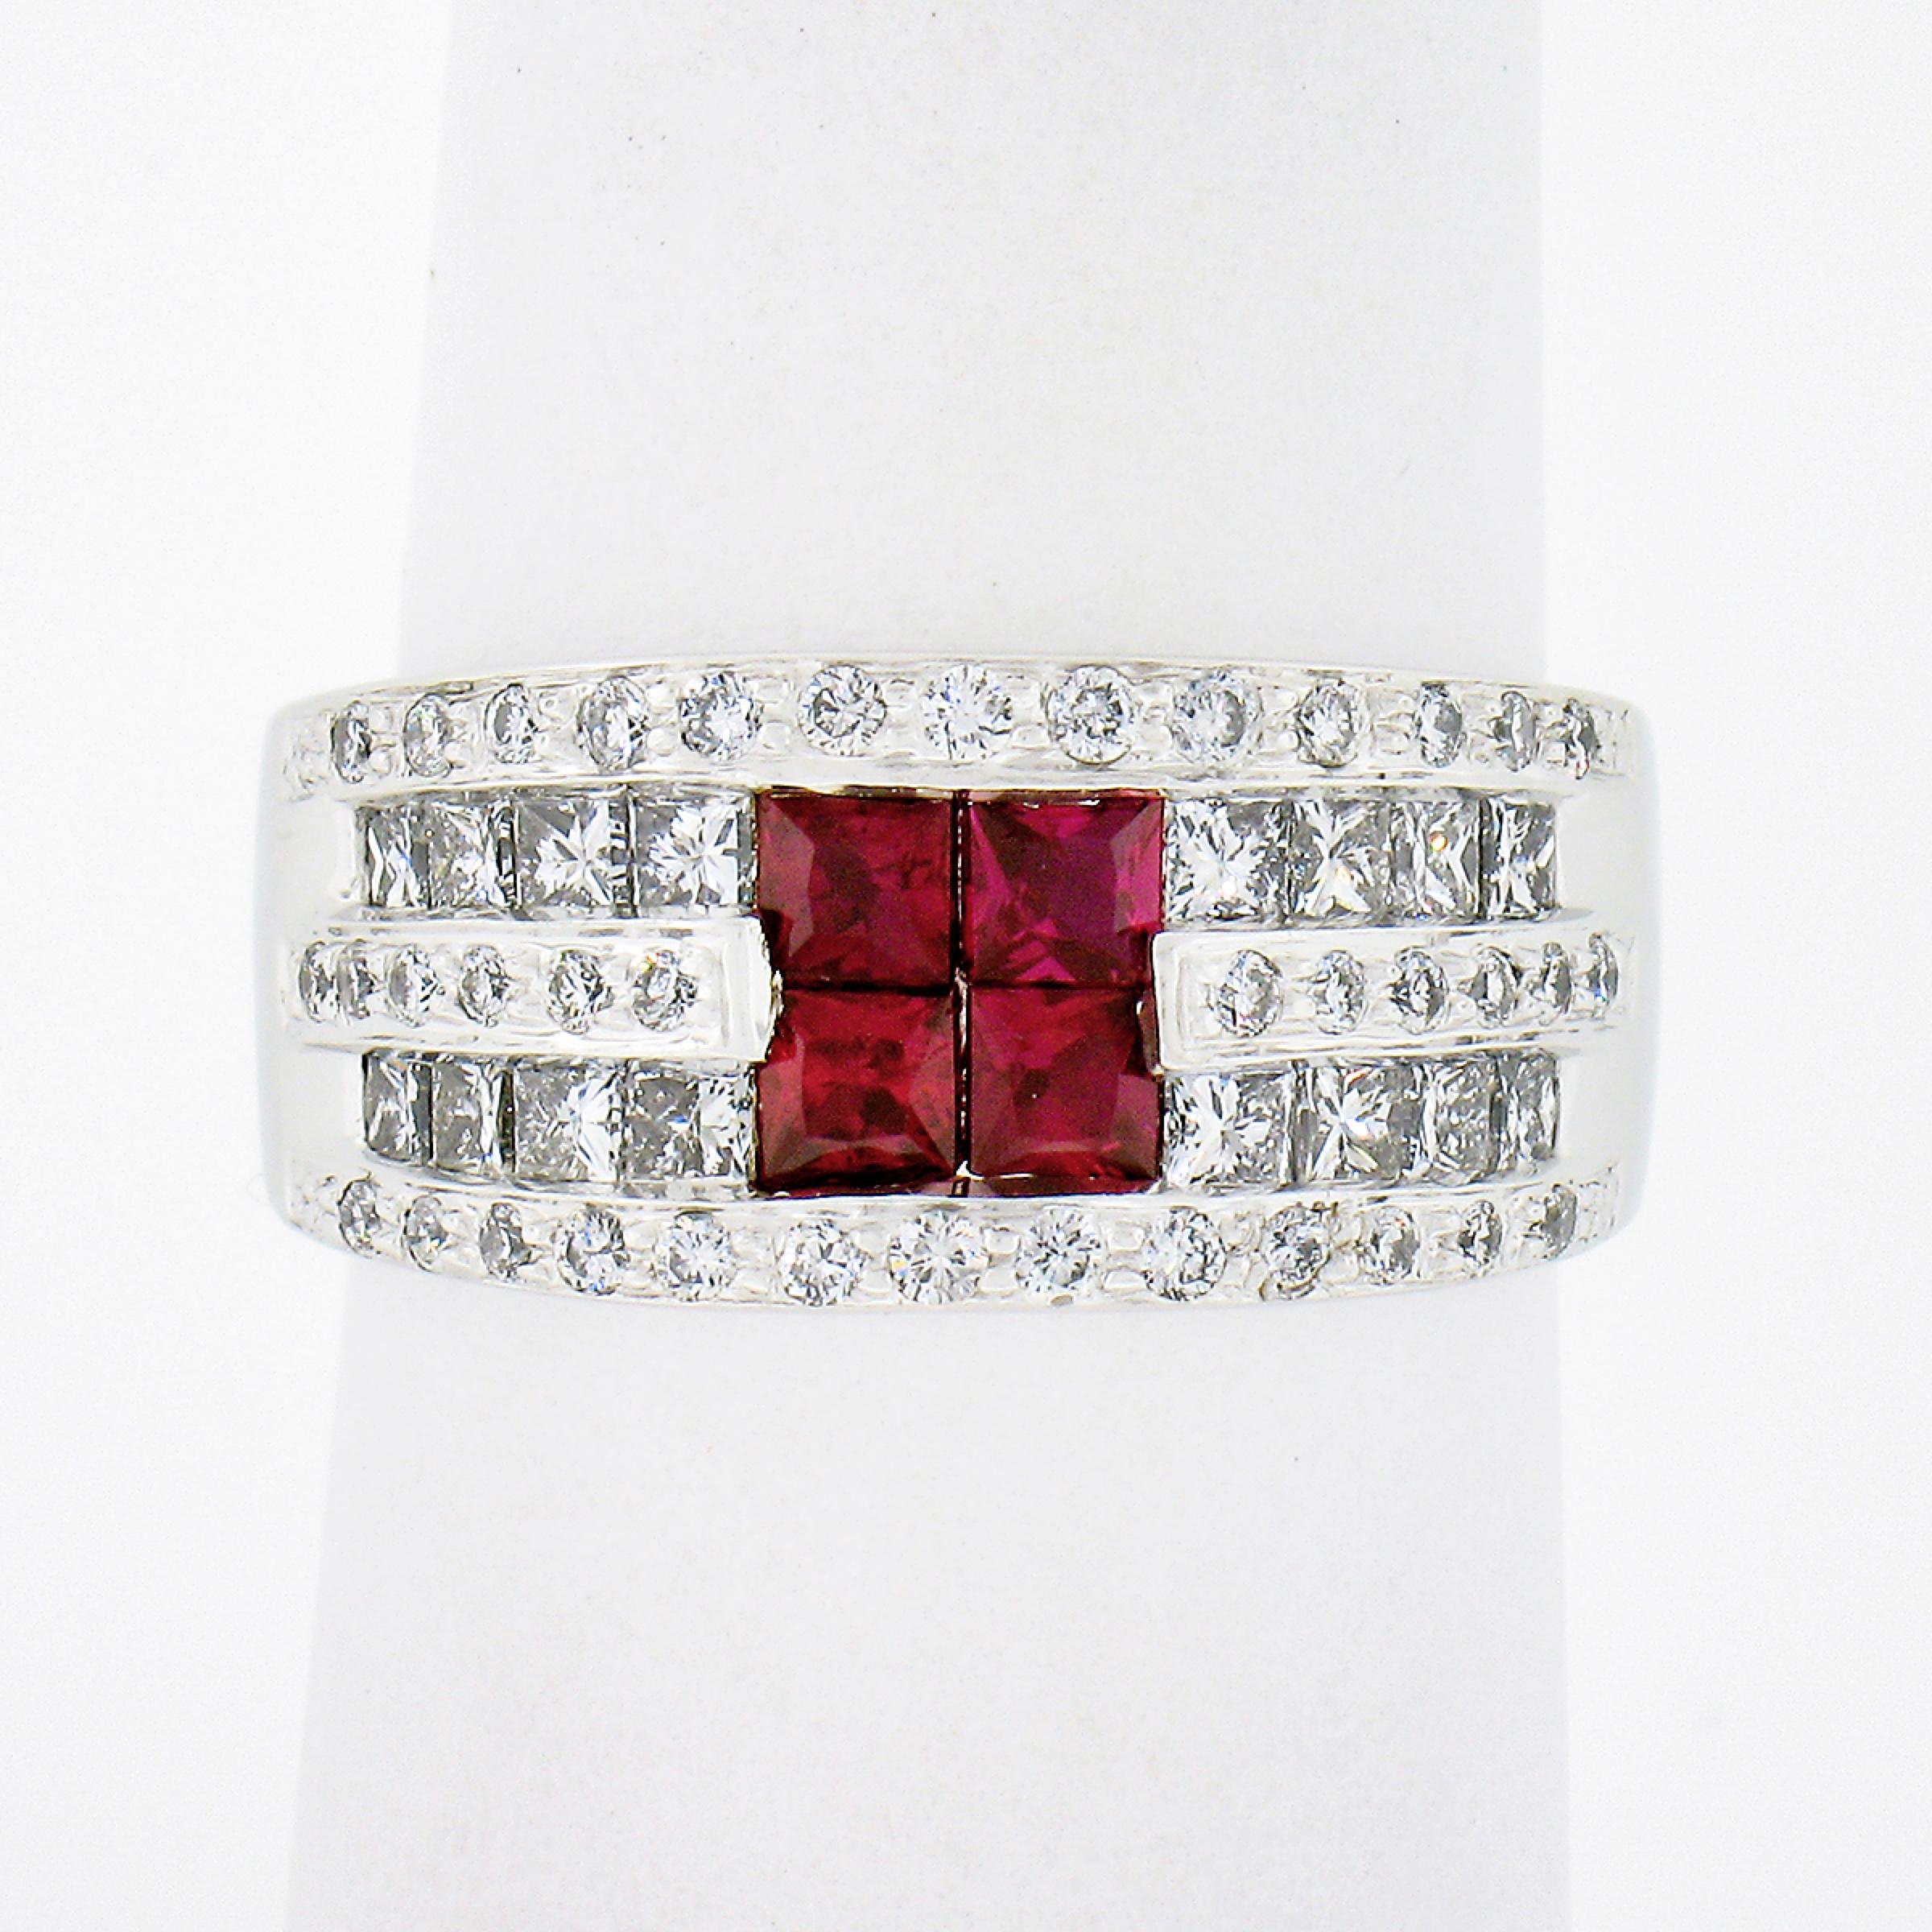 Here we have an absolutely outstanding wide band ring crafted from solid 18k white gold. It features 4 fine rubies neatly invisible set at its center in which gives the look of one stone. Each of the square cut rubies show an absolutely gorgeous